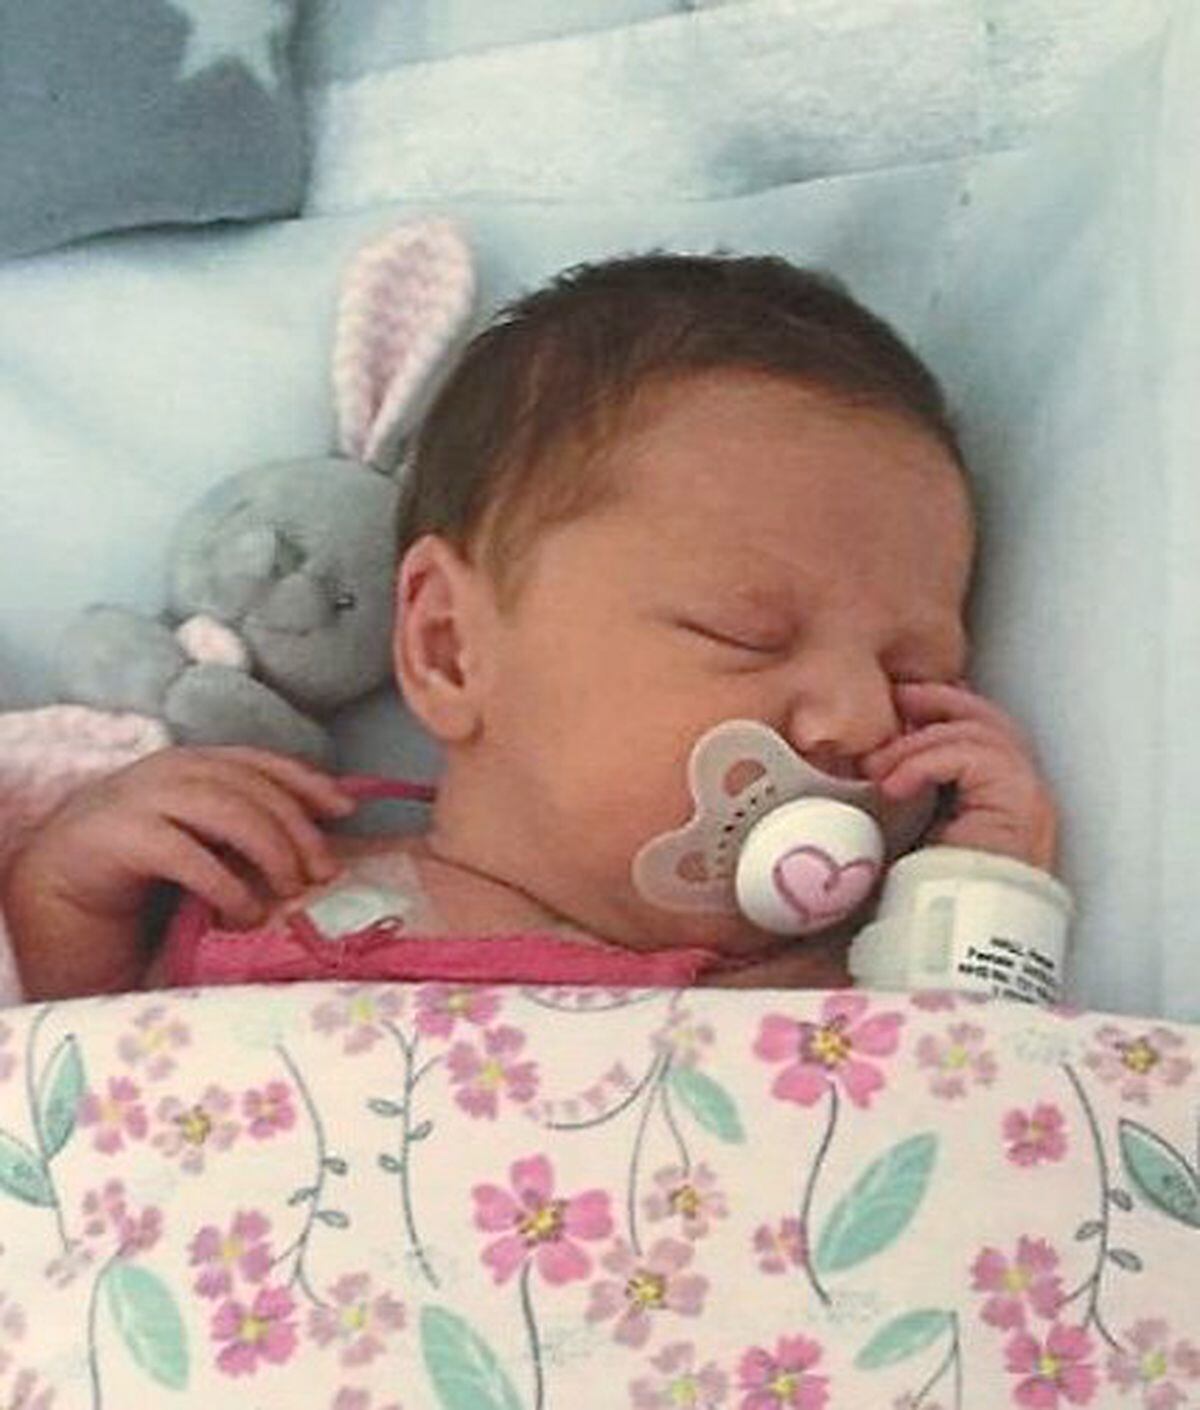 Baby Harper who had a heart condition